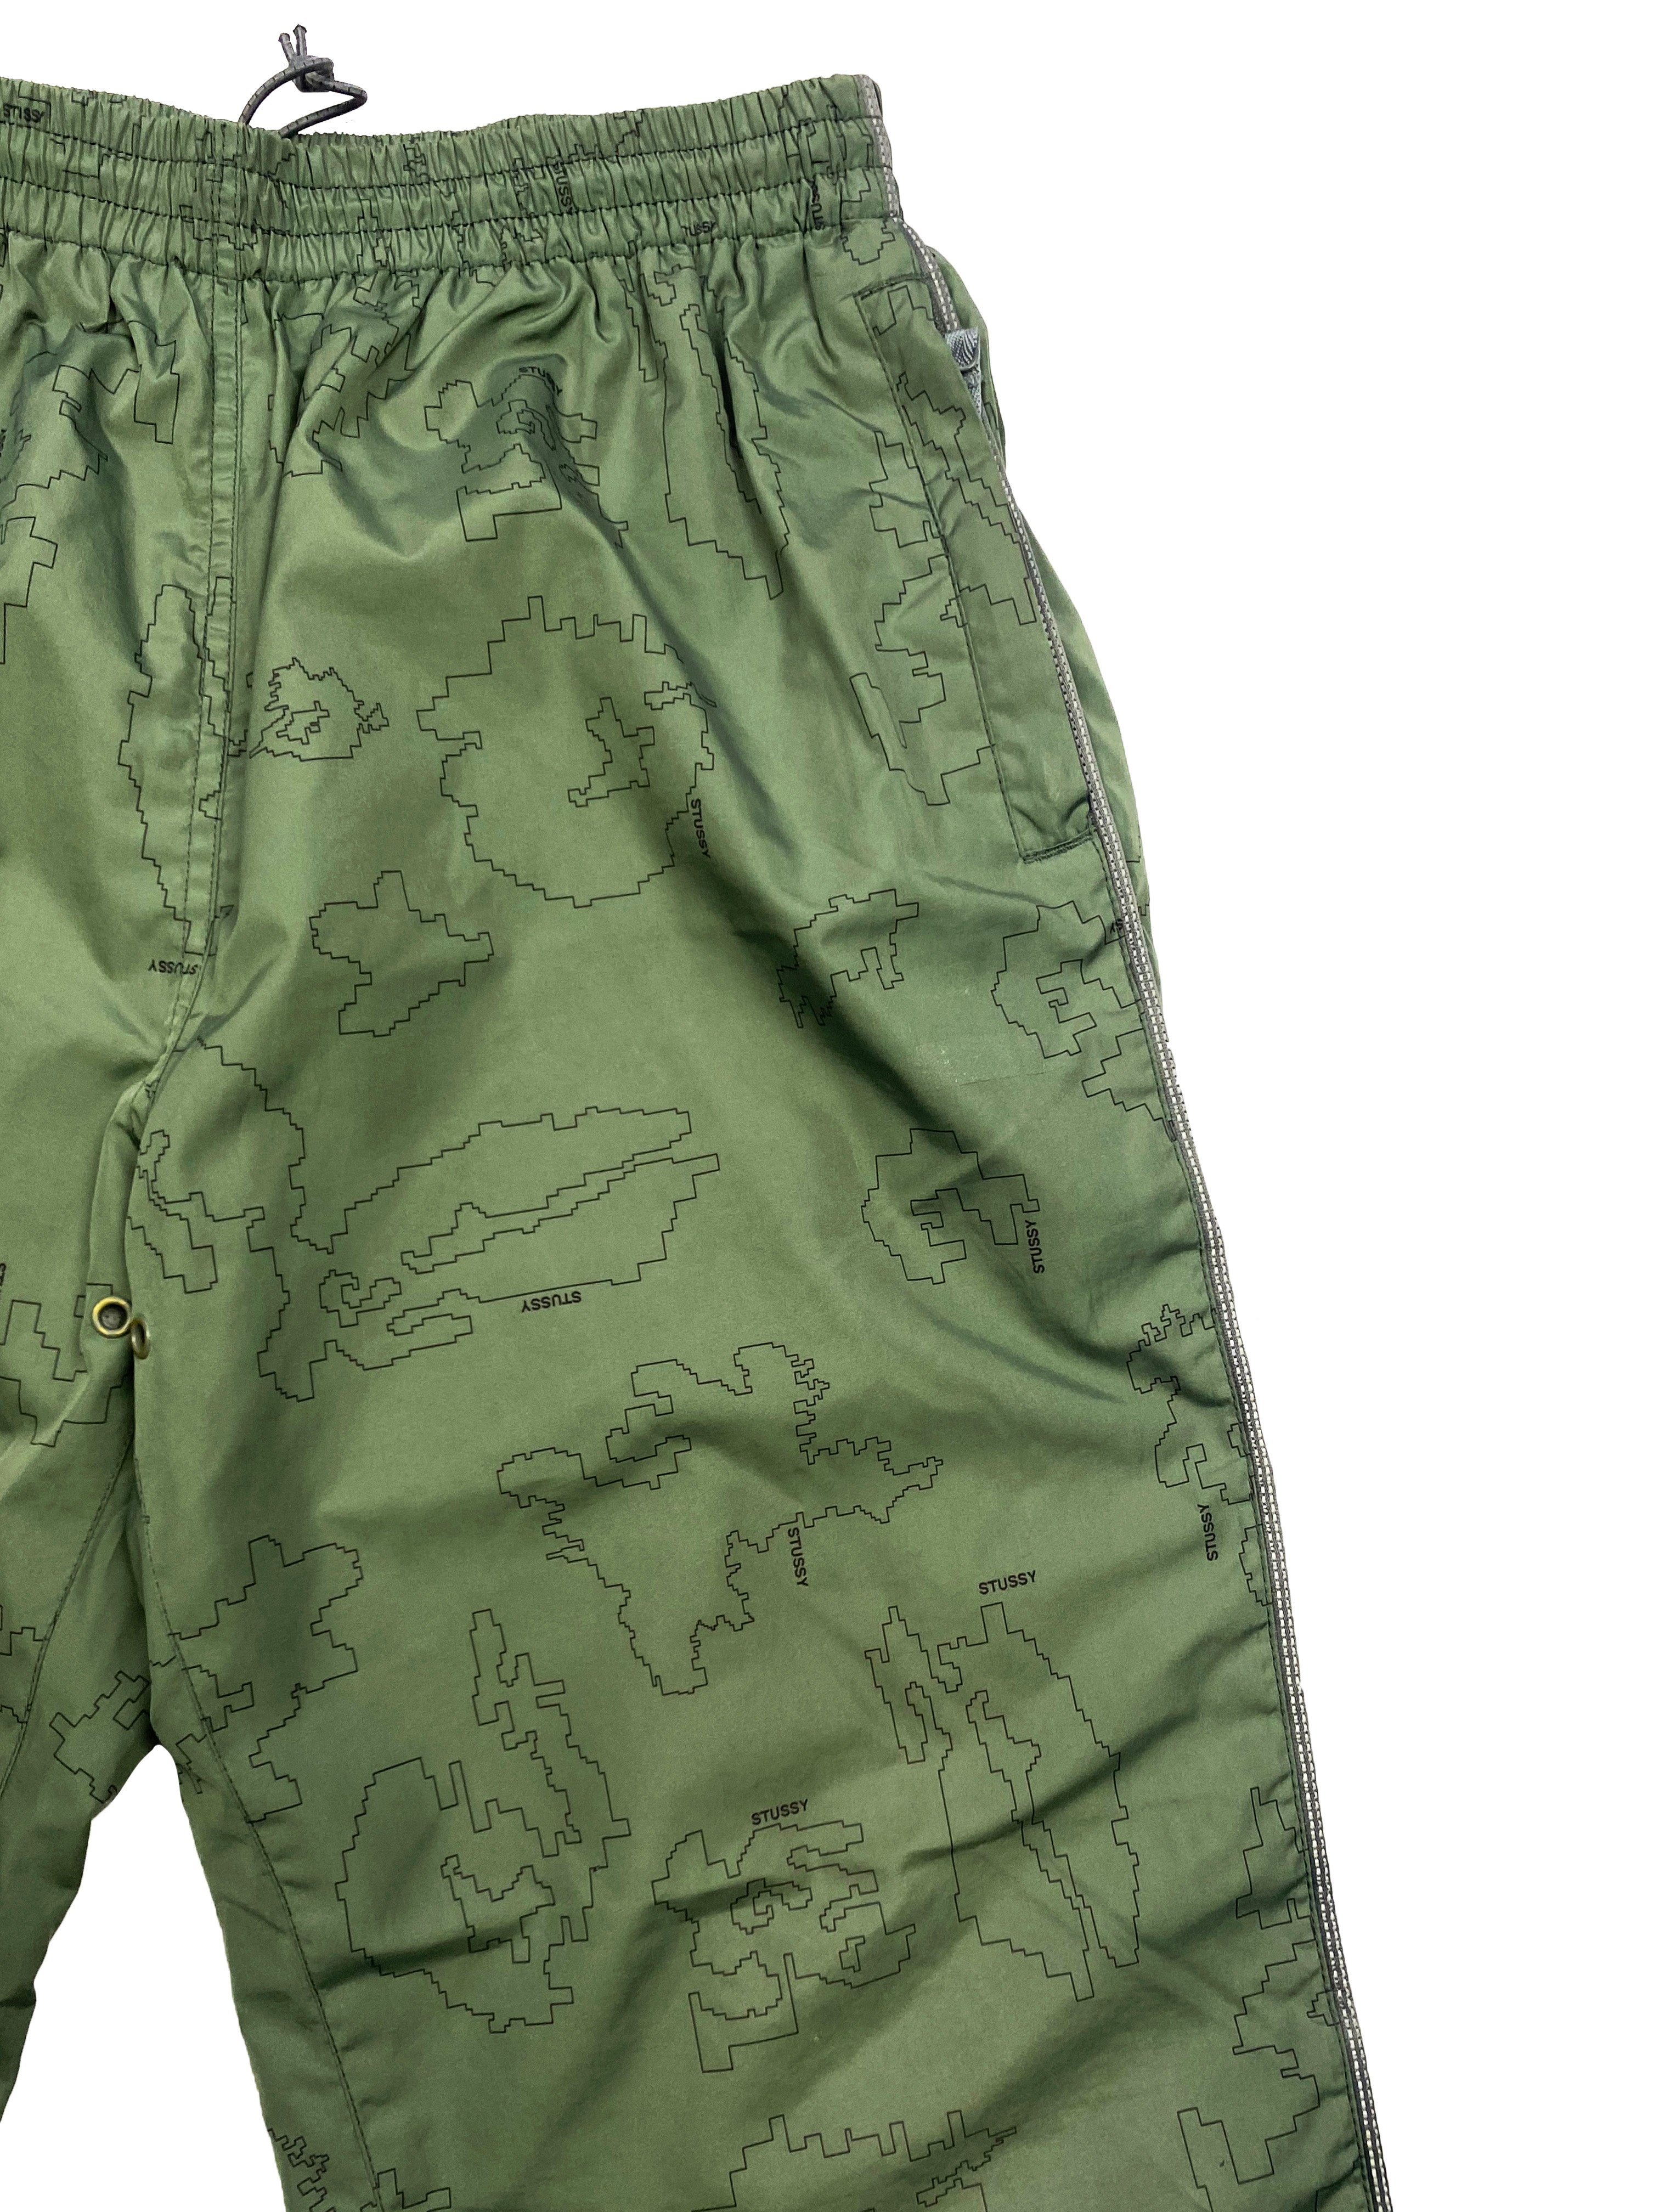 Stussy Green Patterned Spell Out Tracksuit Bottoms 00's